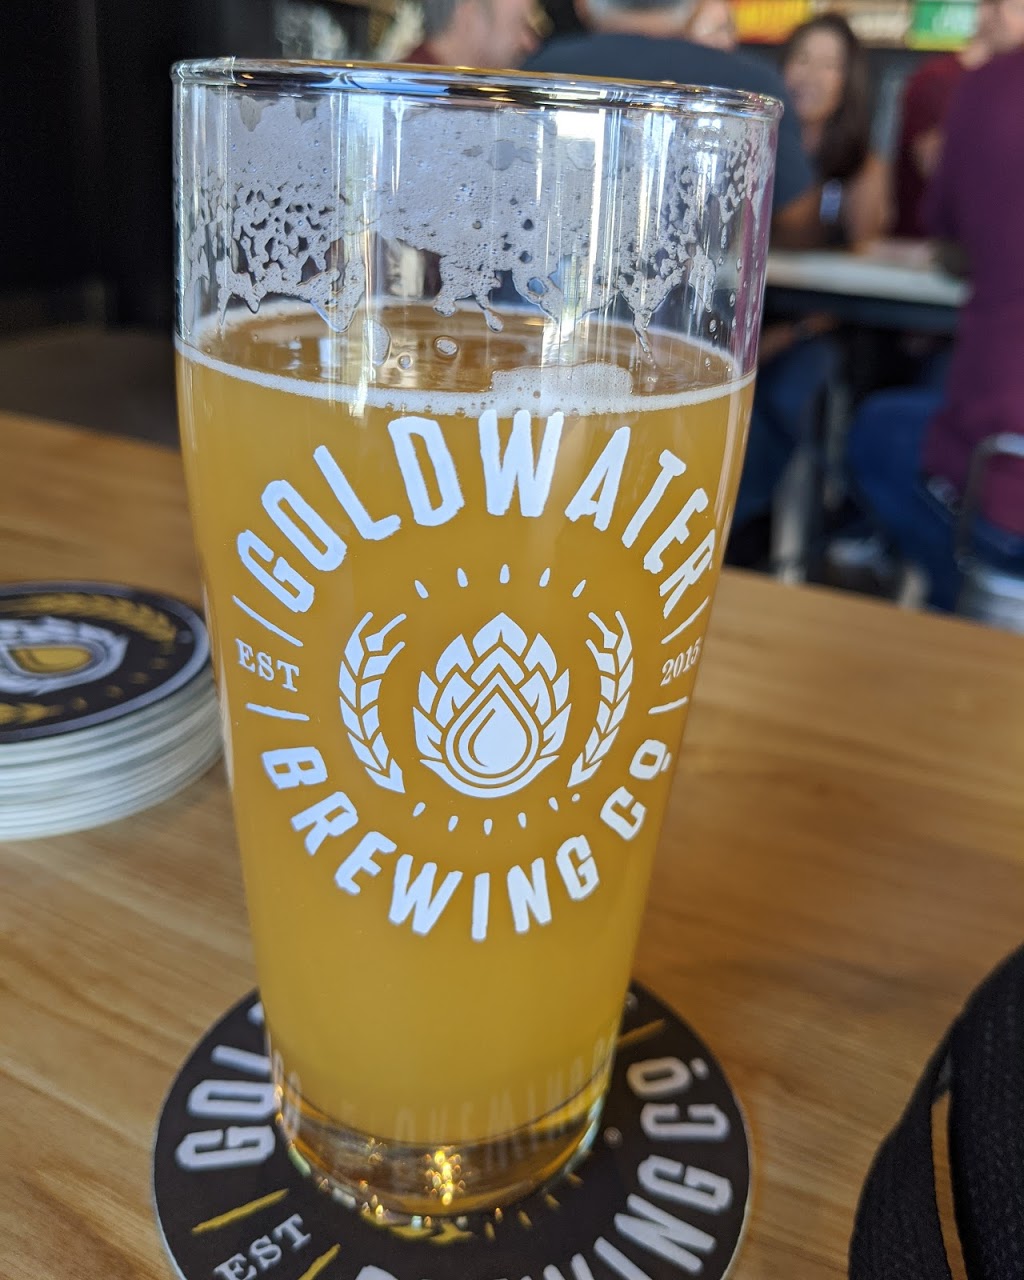 Goldwater Brewing Co. Longbow Tap Room | 5942 E Longbow Pkwy Unit 105, Mesa, AZ 85215, USA | Phone: (480) 590-3215